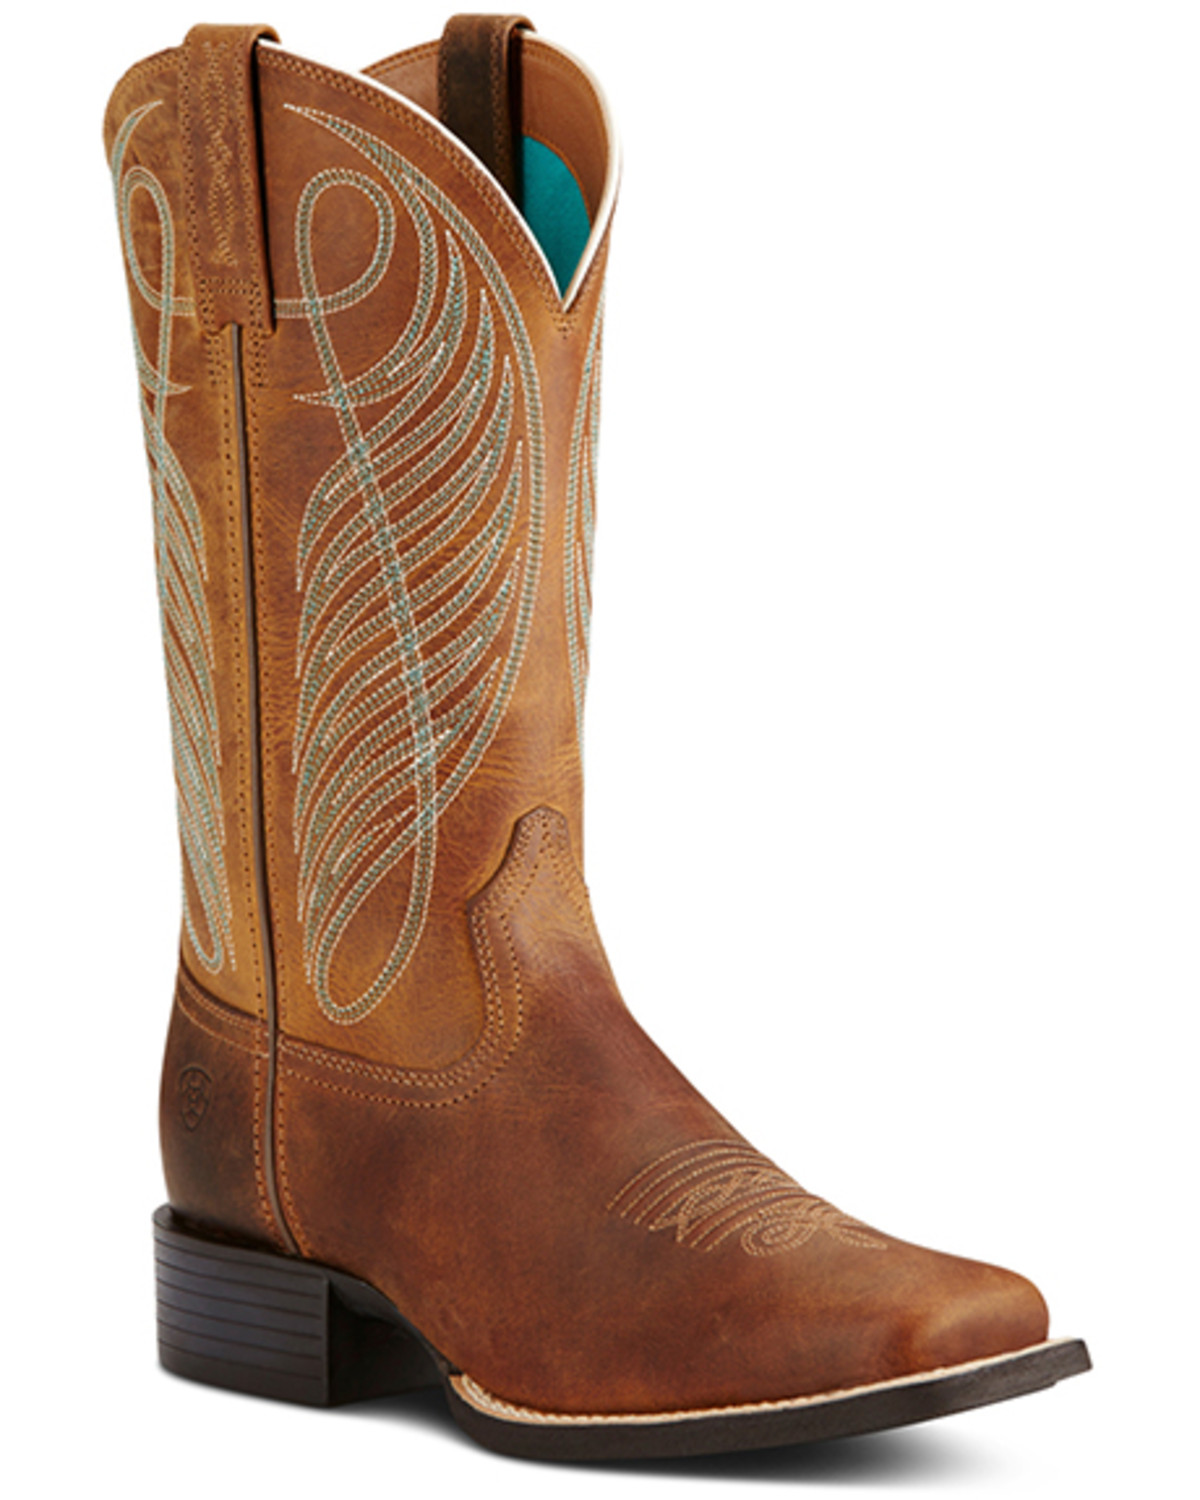 Ariat Women's Round Up Western Boots - Square Toe